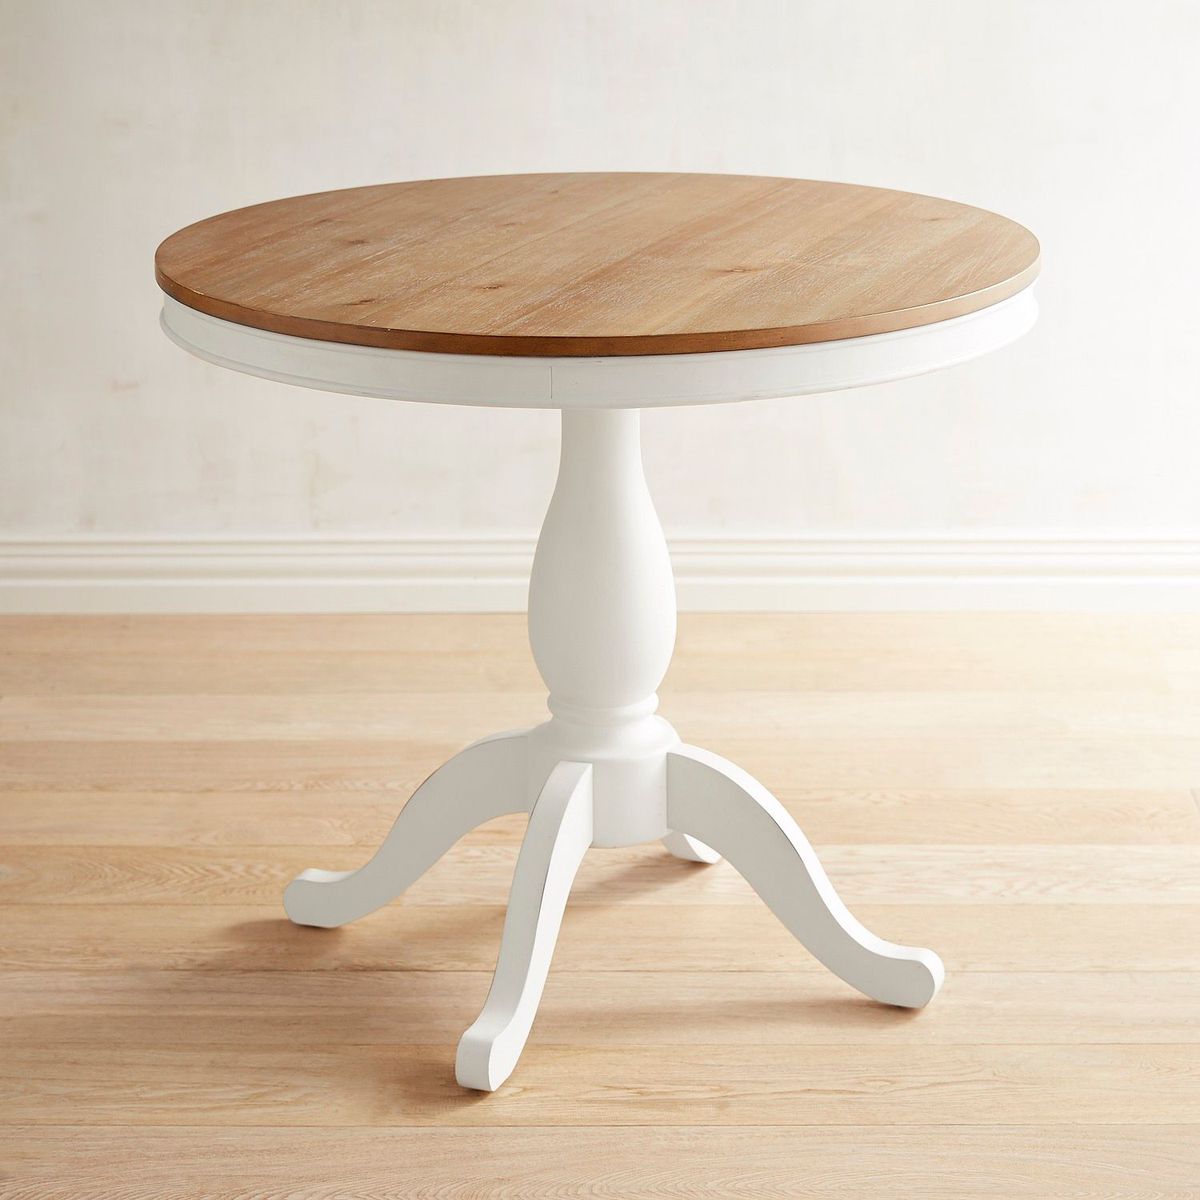 A round table with a natural wood top and white base with four legs. 